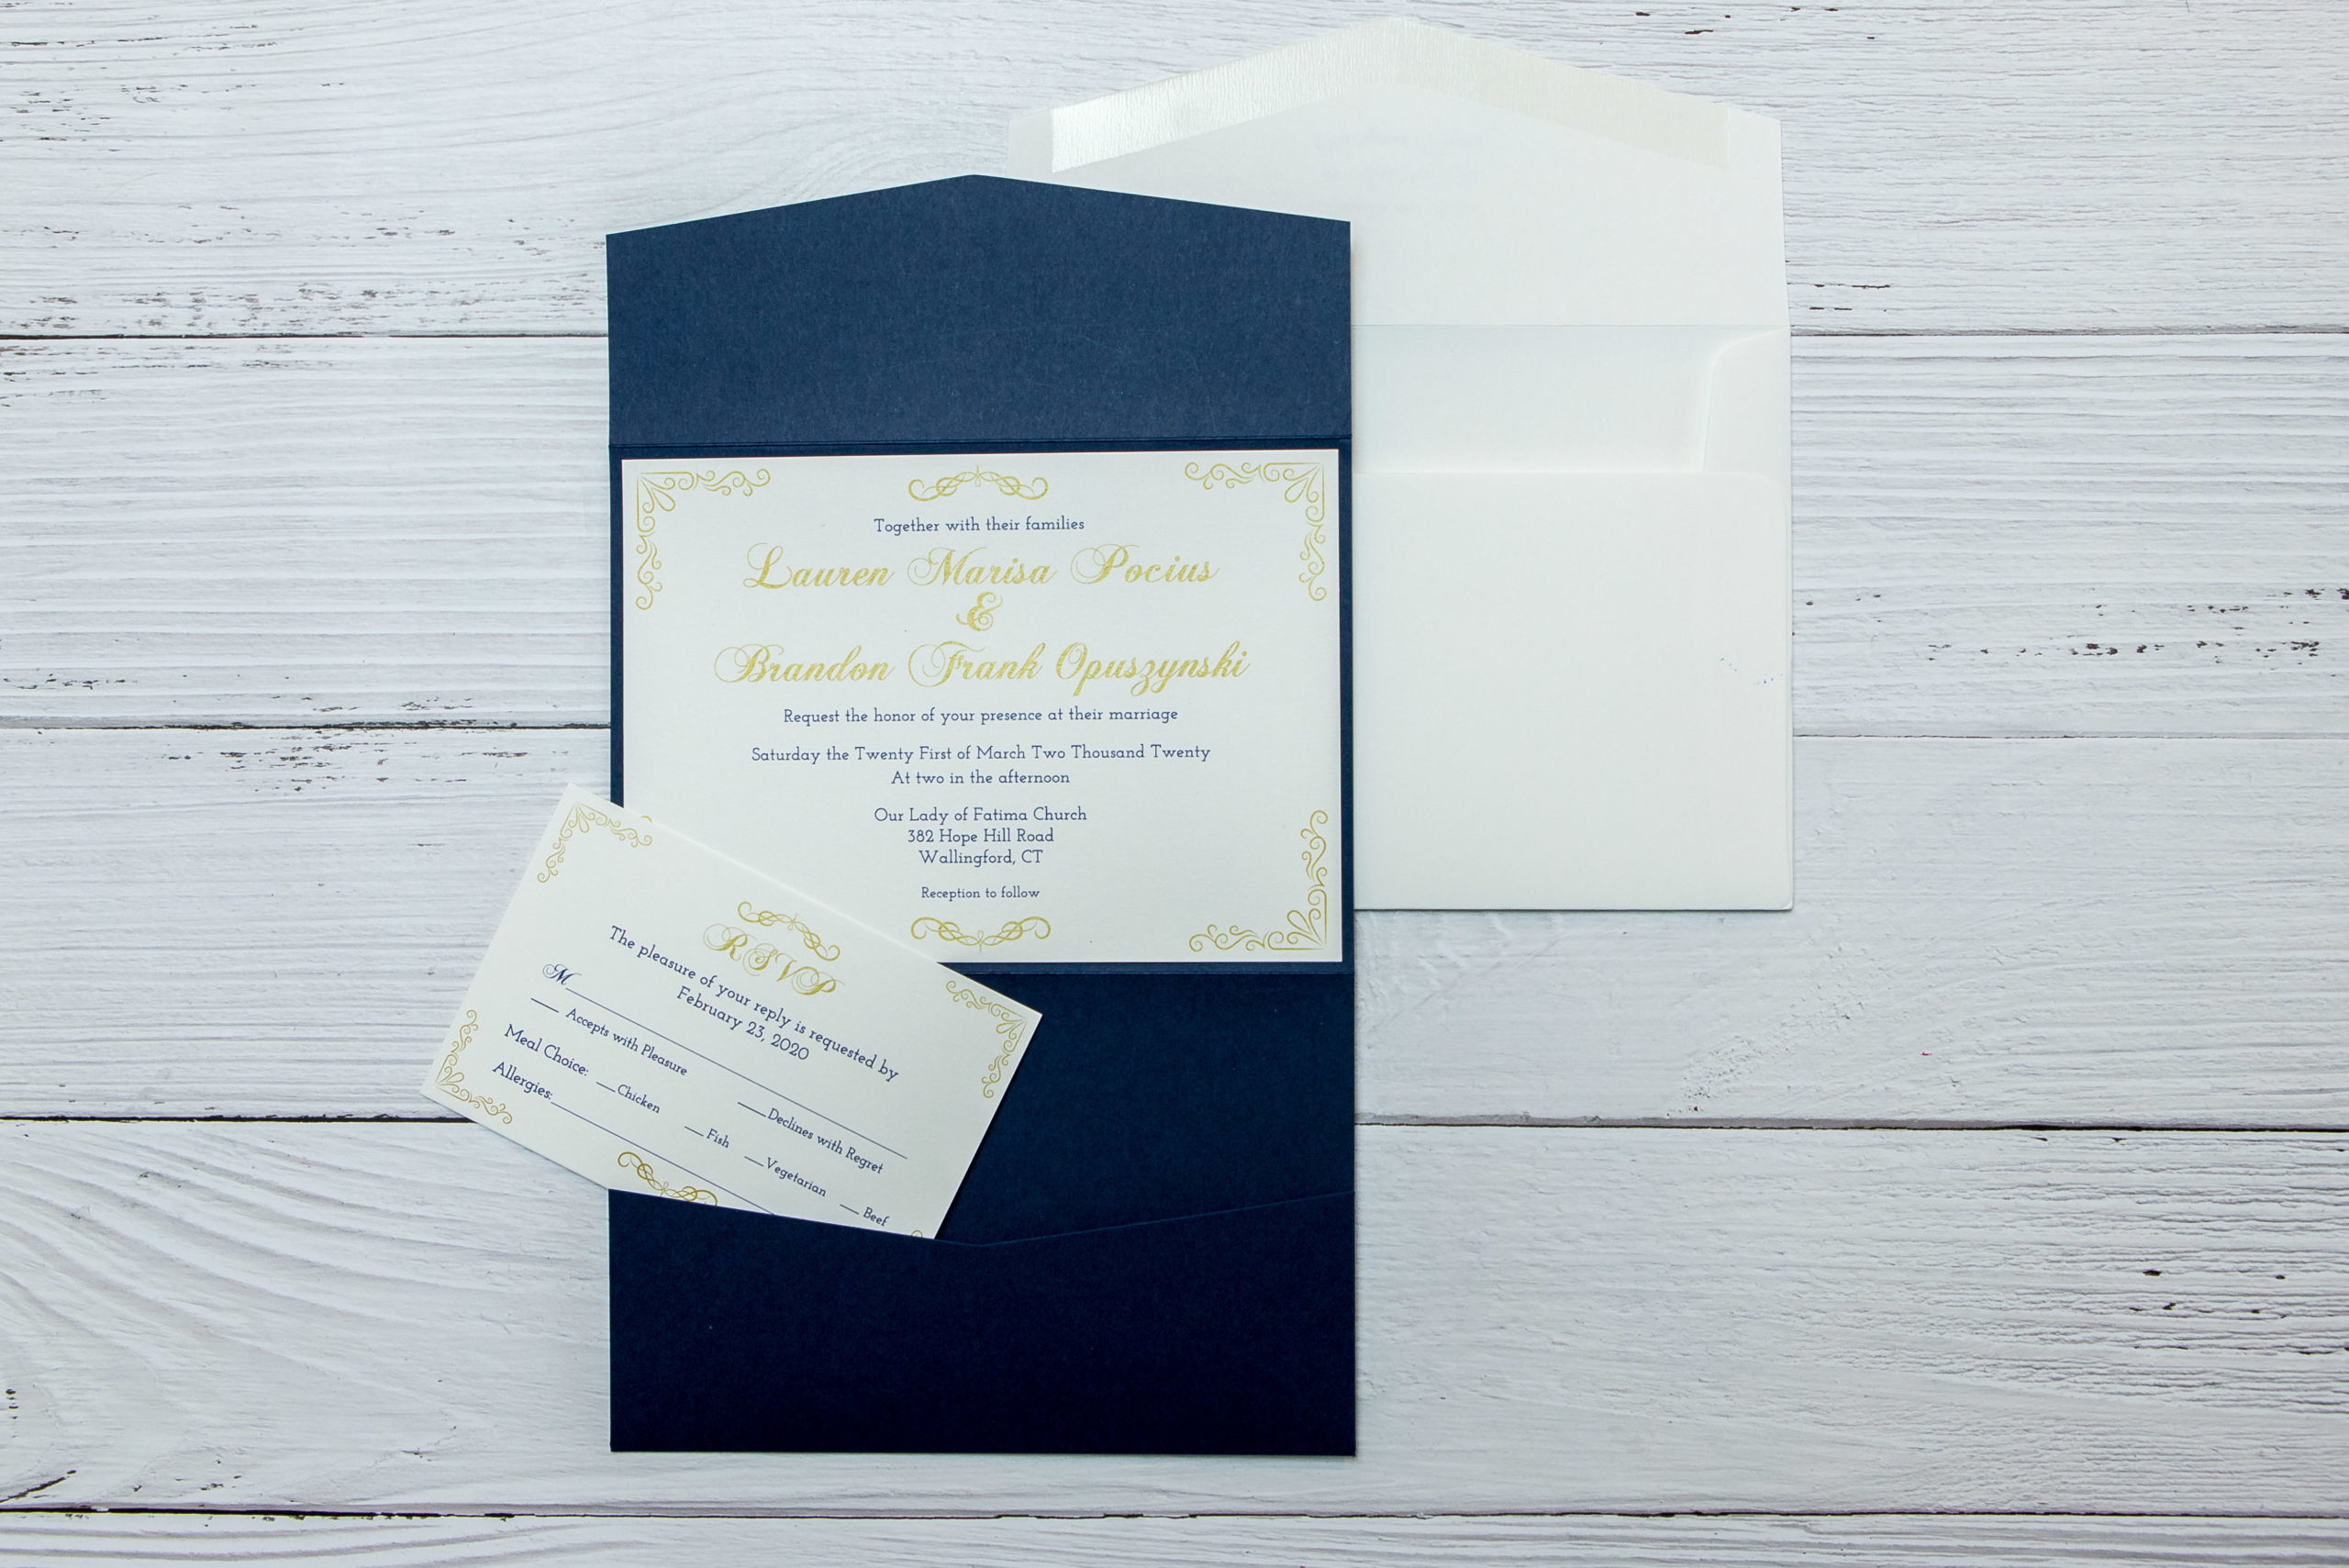 timeless invitations with navy and gold with cream pointed flap envelopes and navy pocket envelopes
